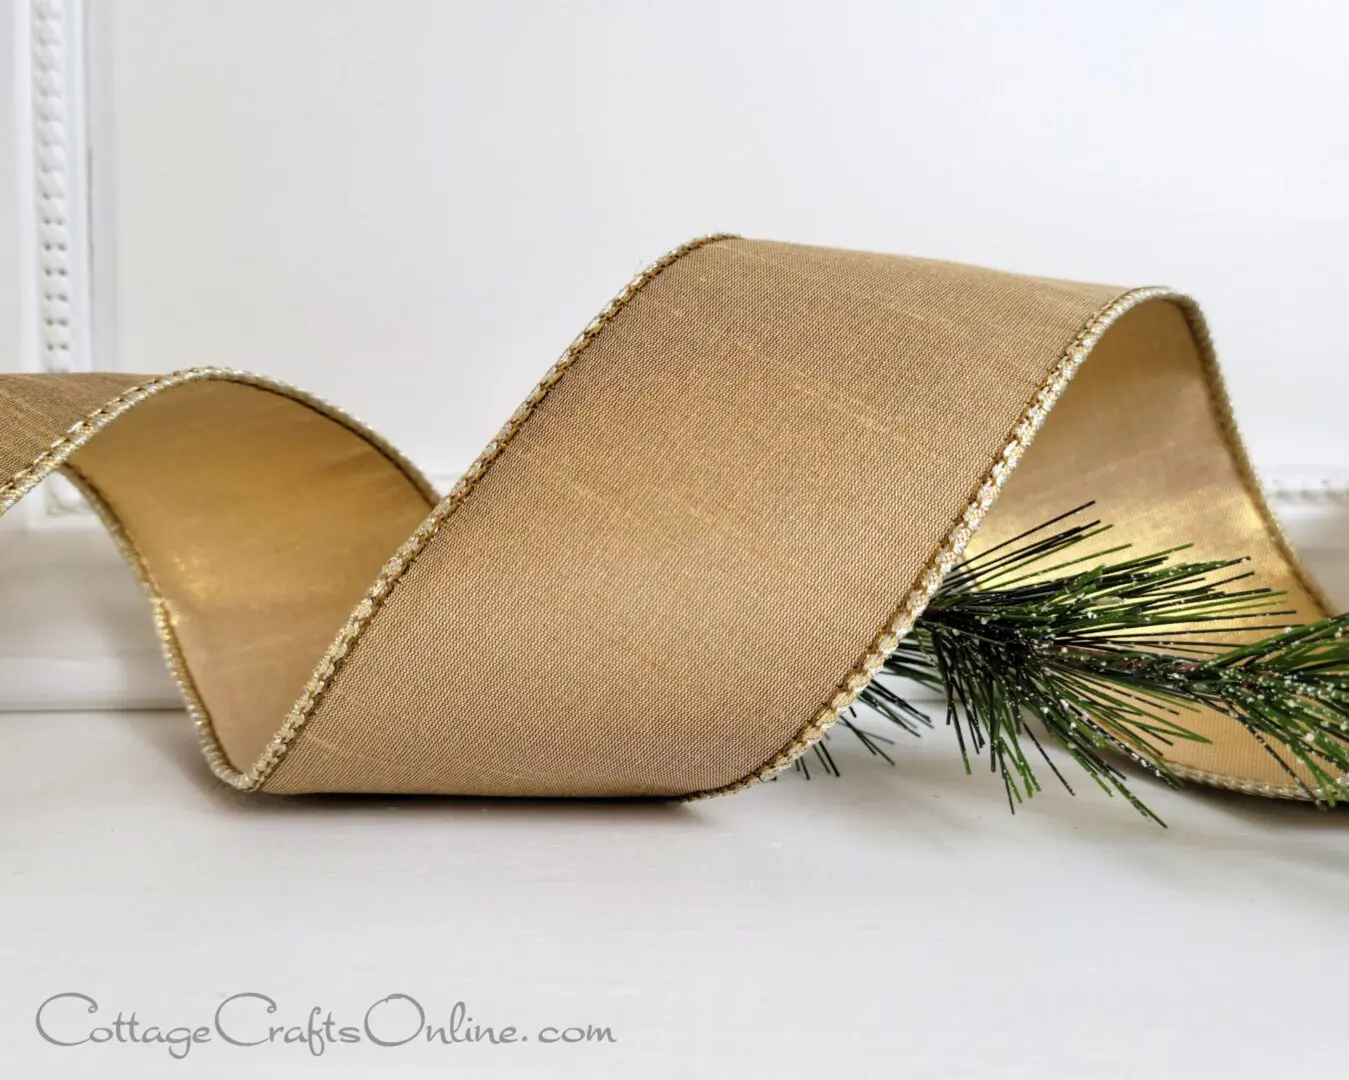 A new Christmas ribbon featuring a pine branch design.